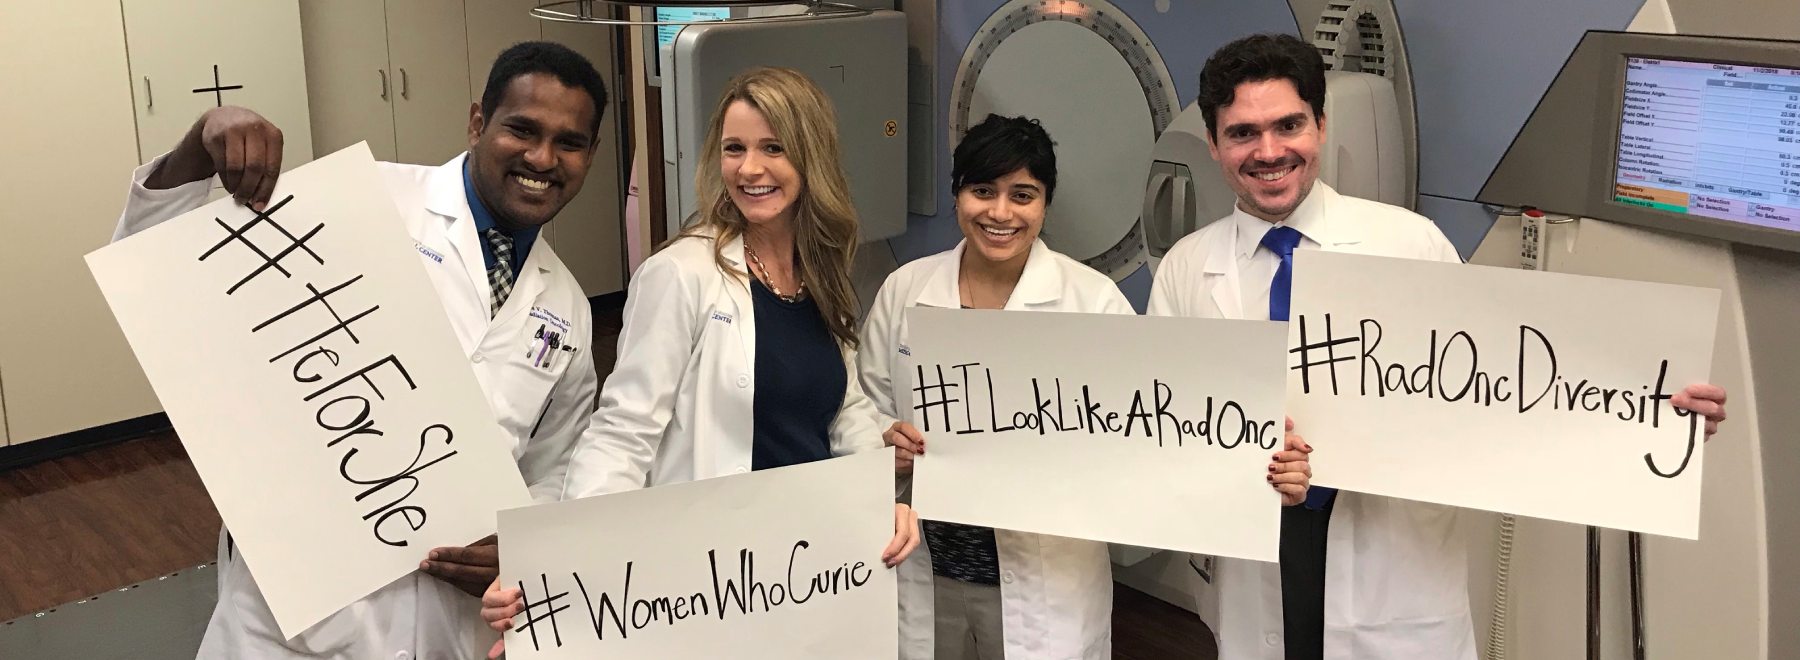 Four radiation oncologists hold signs stating HeForShe, WomenWhoCurie, ILookLikeARadOnc and RadOncDiversity